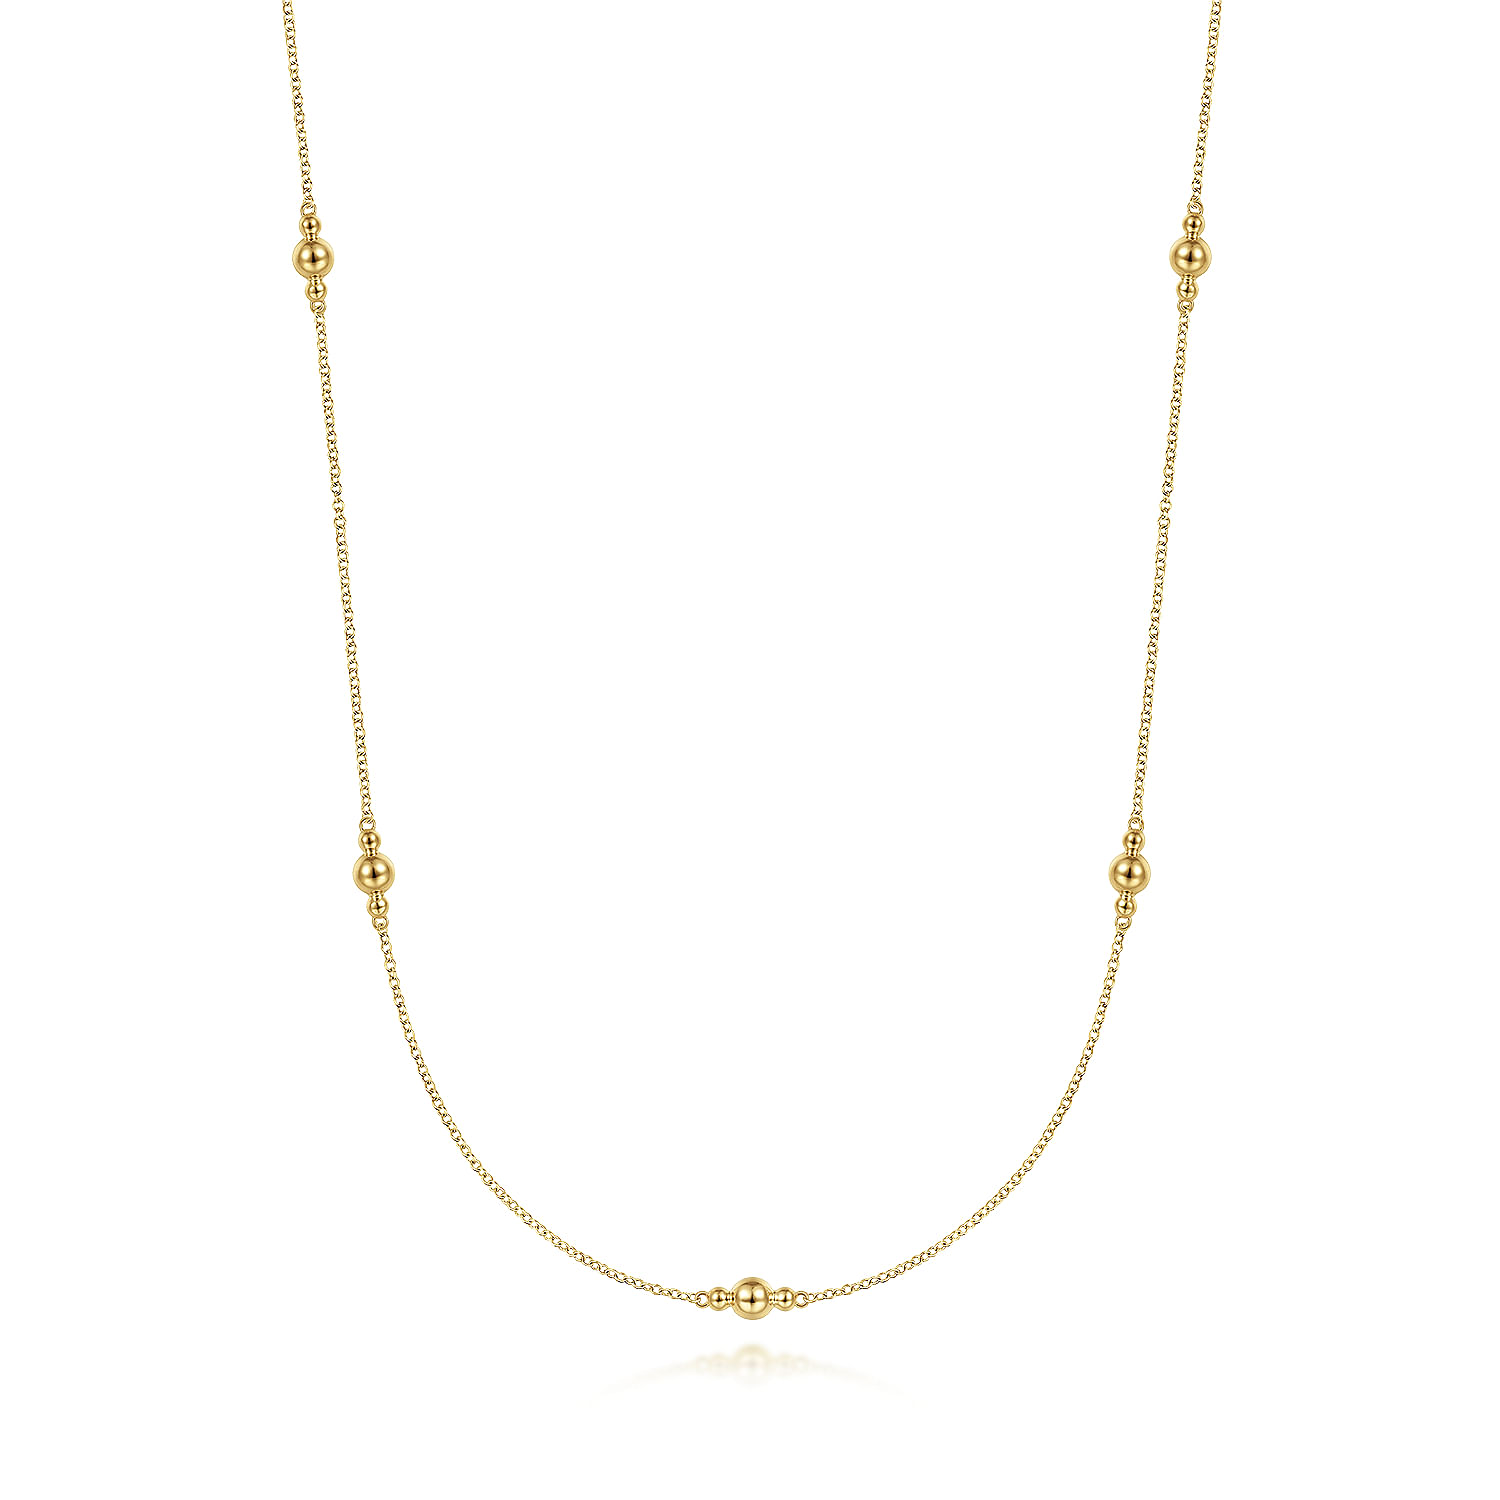 28 inch 14K Yellow Gold Bujukan Bead Station Necklace